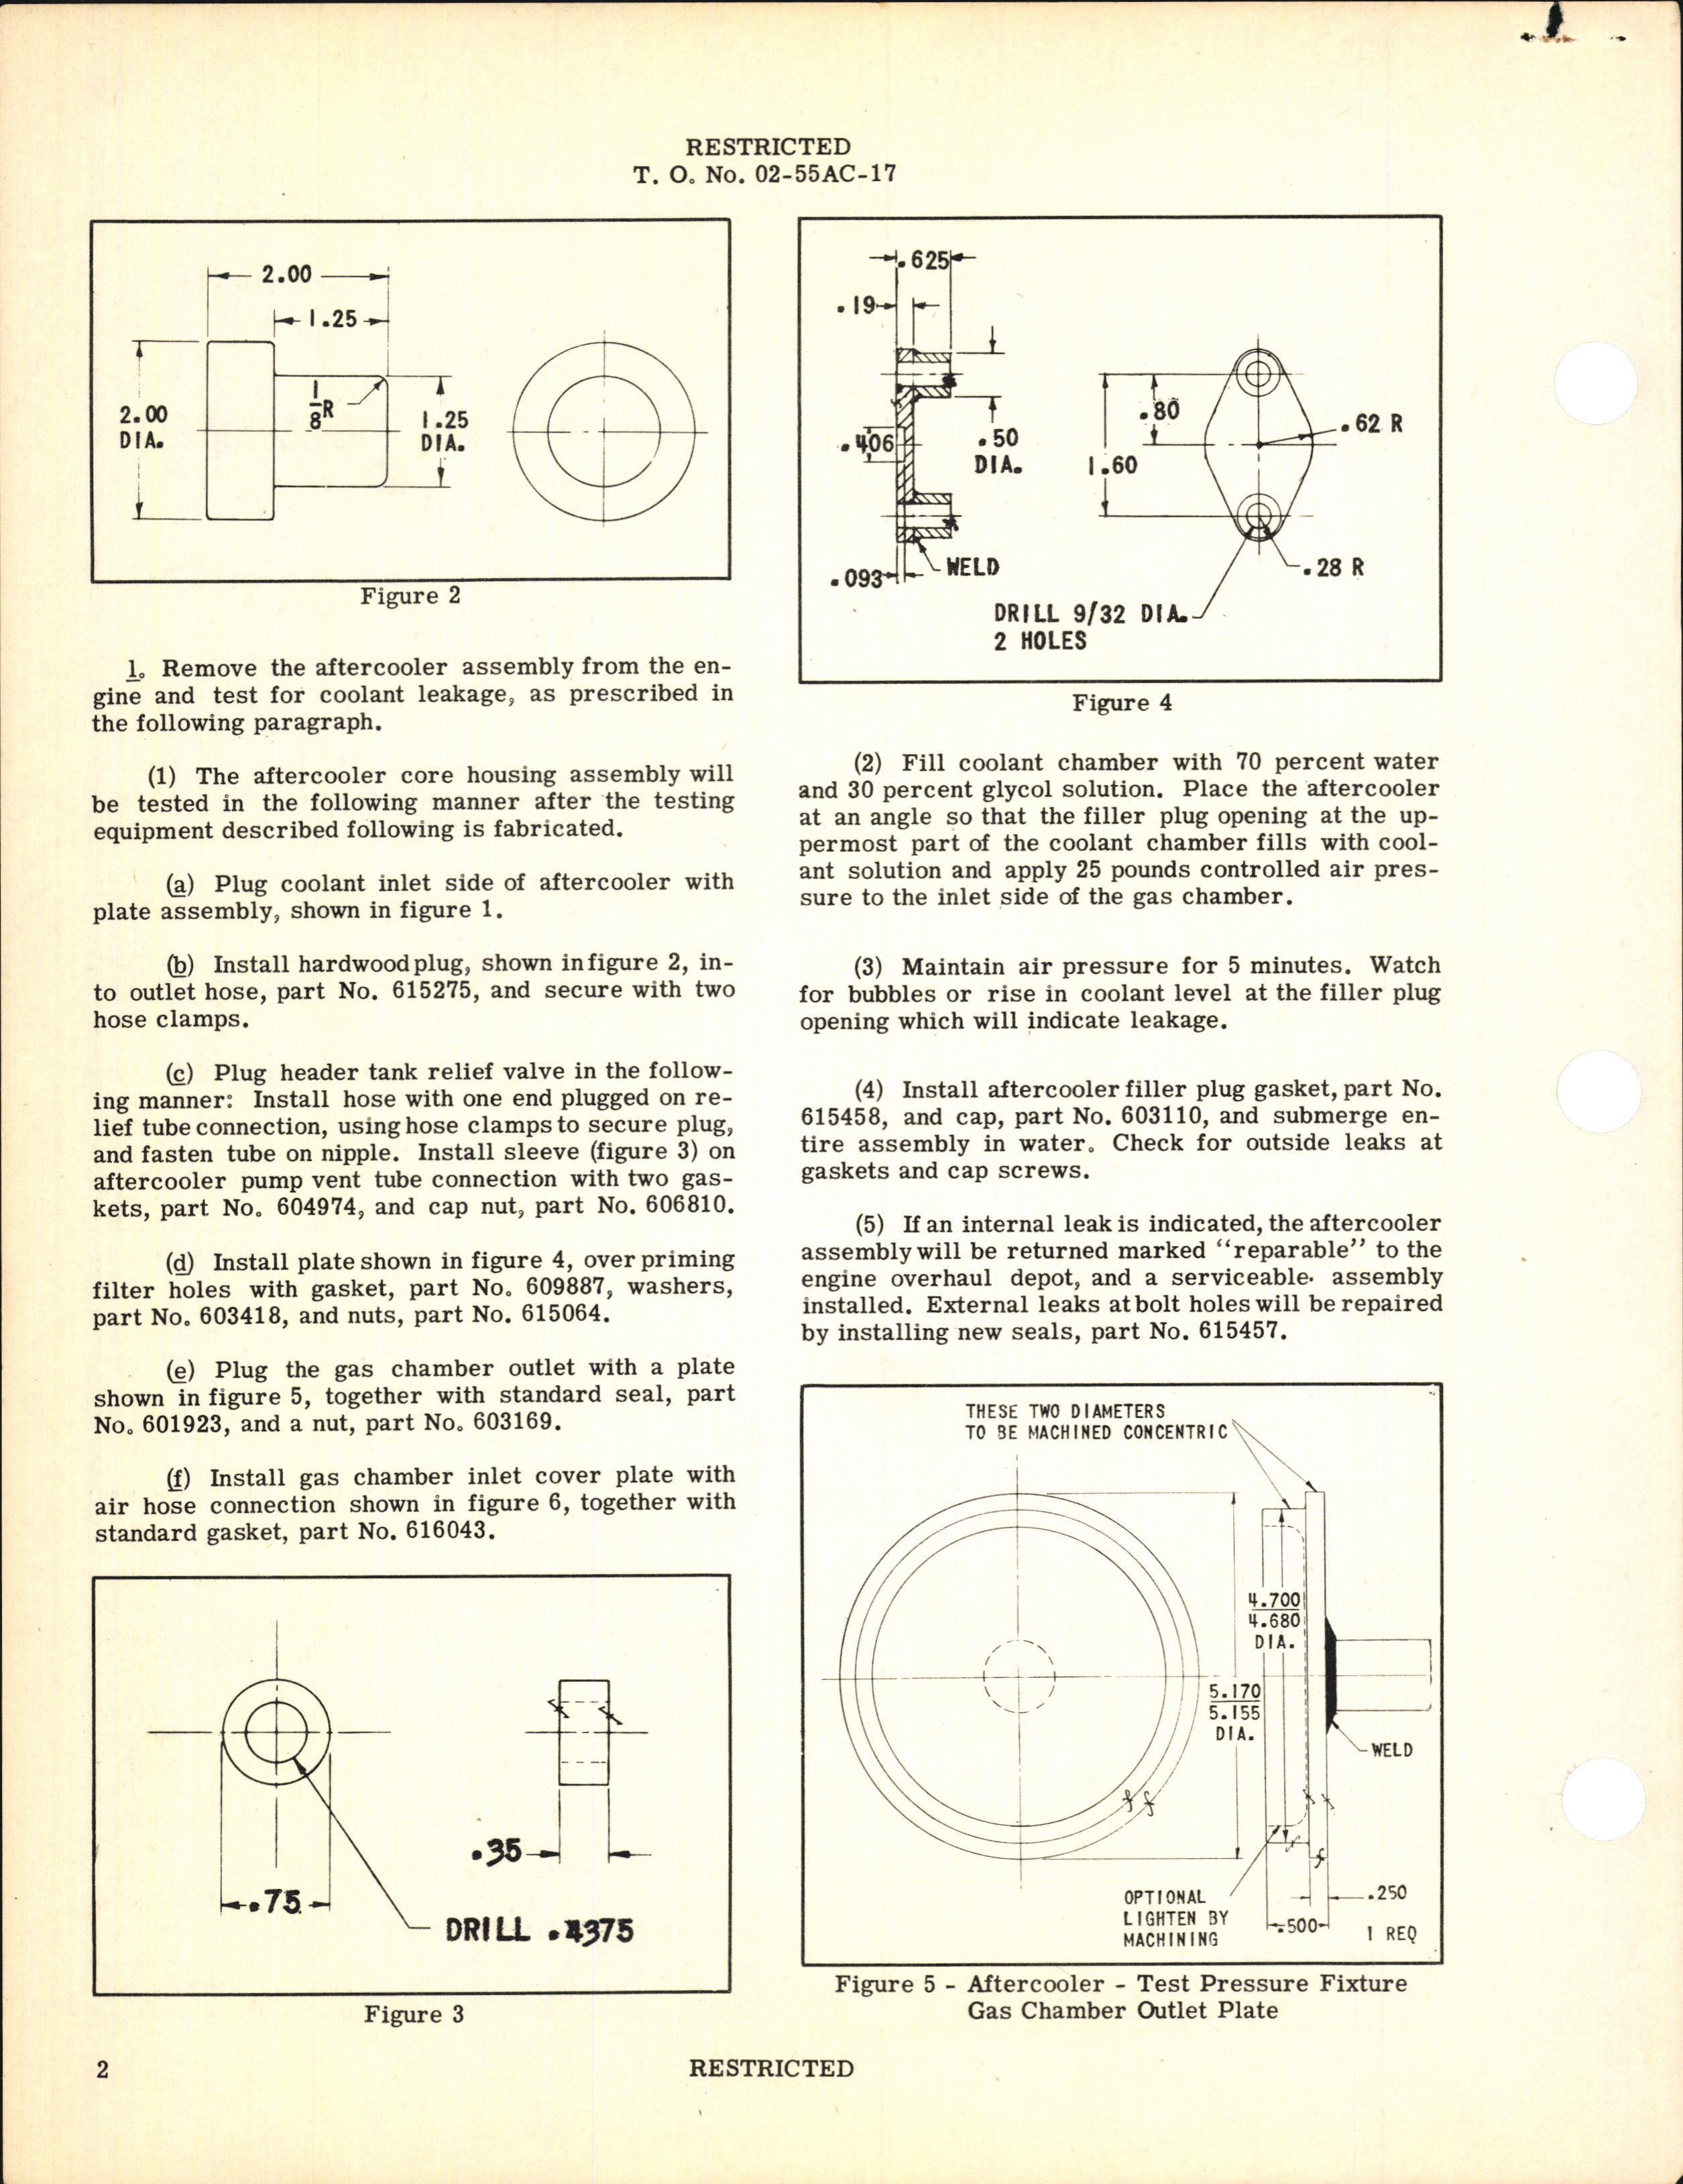 Sample page 2 from AirCorps Library document: Aftercooler Overhaul Procedure and Replacement of Aftercooler Assemblies for V-1650-3 and -7